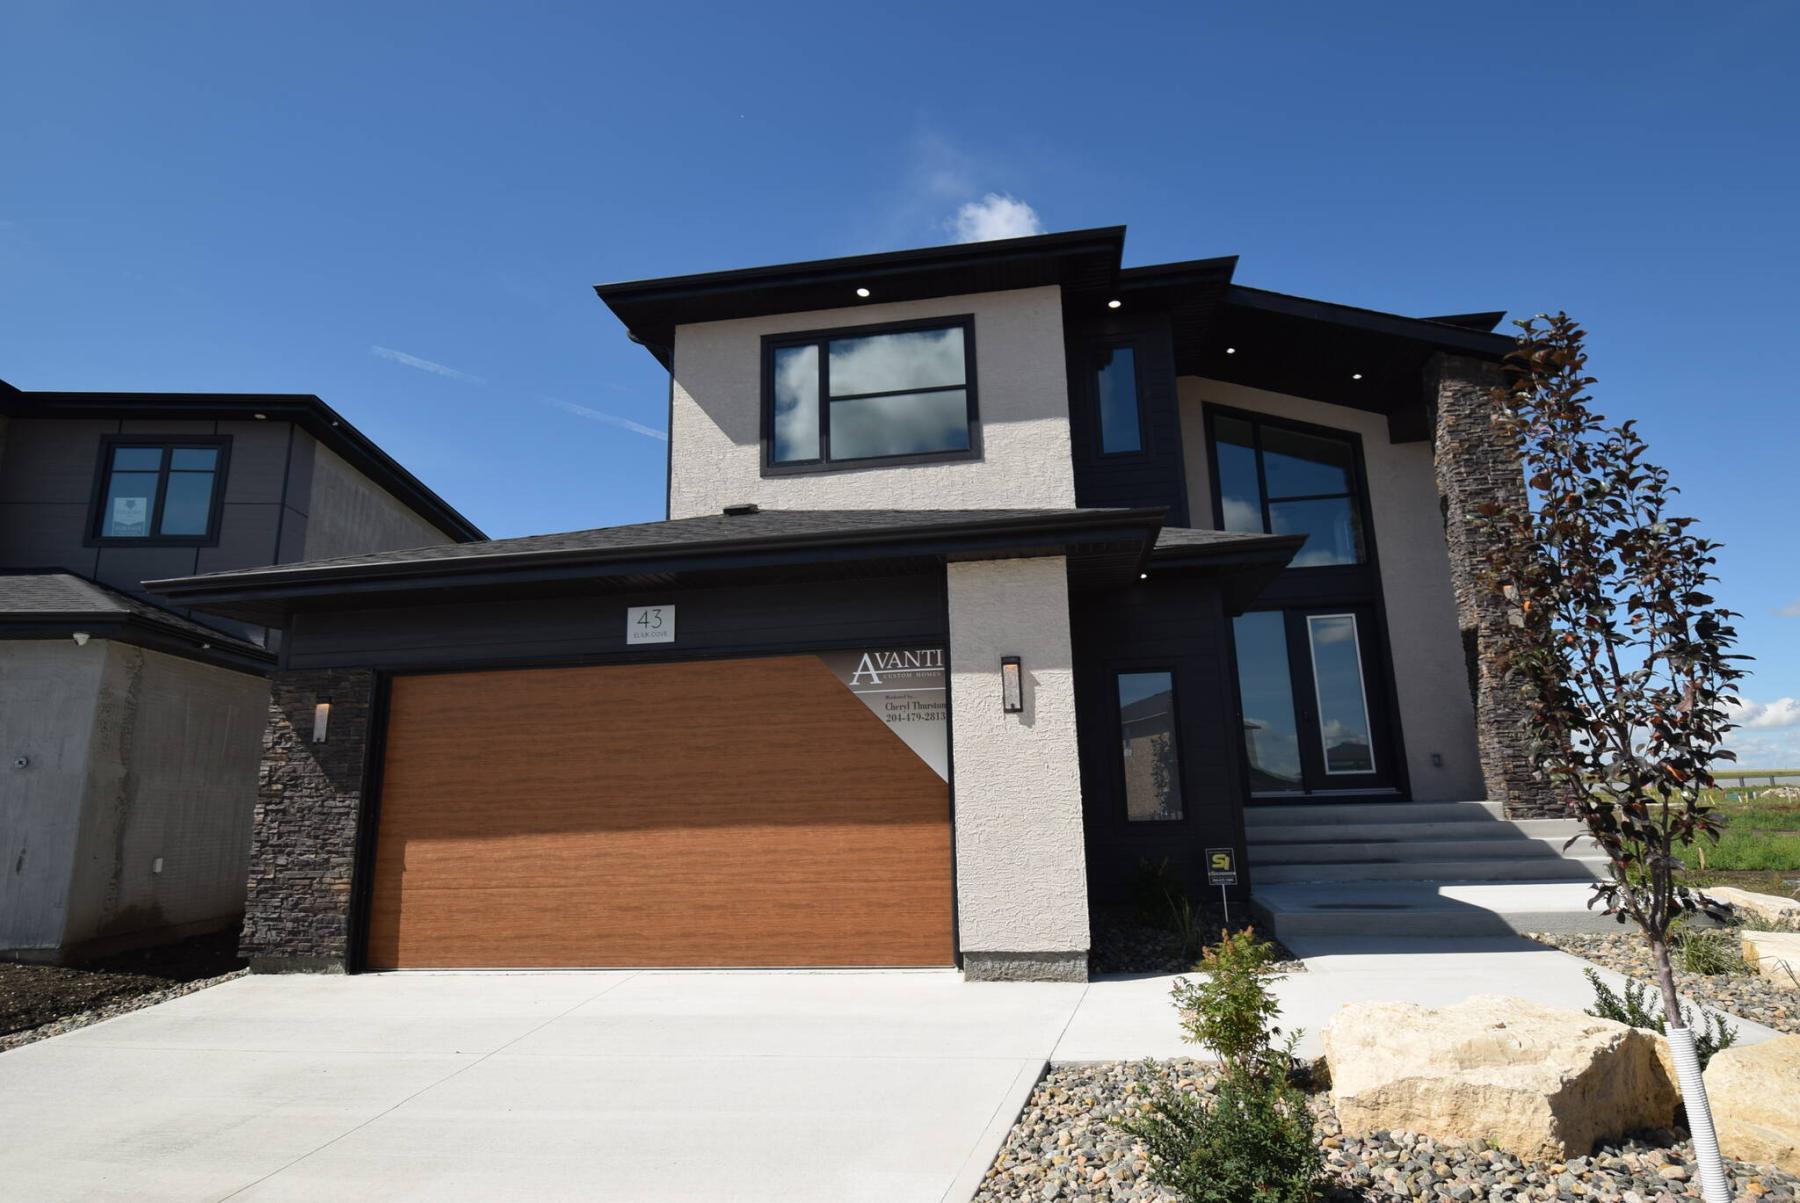  <p>Todd Lewys / Winnipeg Free Press</p>
                                <p>Bright and spacious, this large two-storey is everything a luxury home should be.</p> 